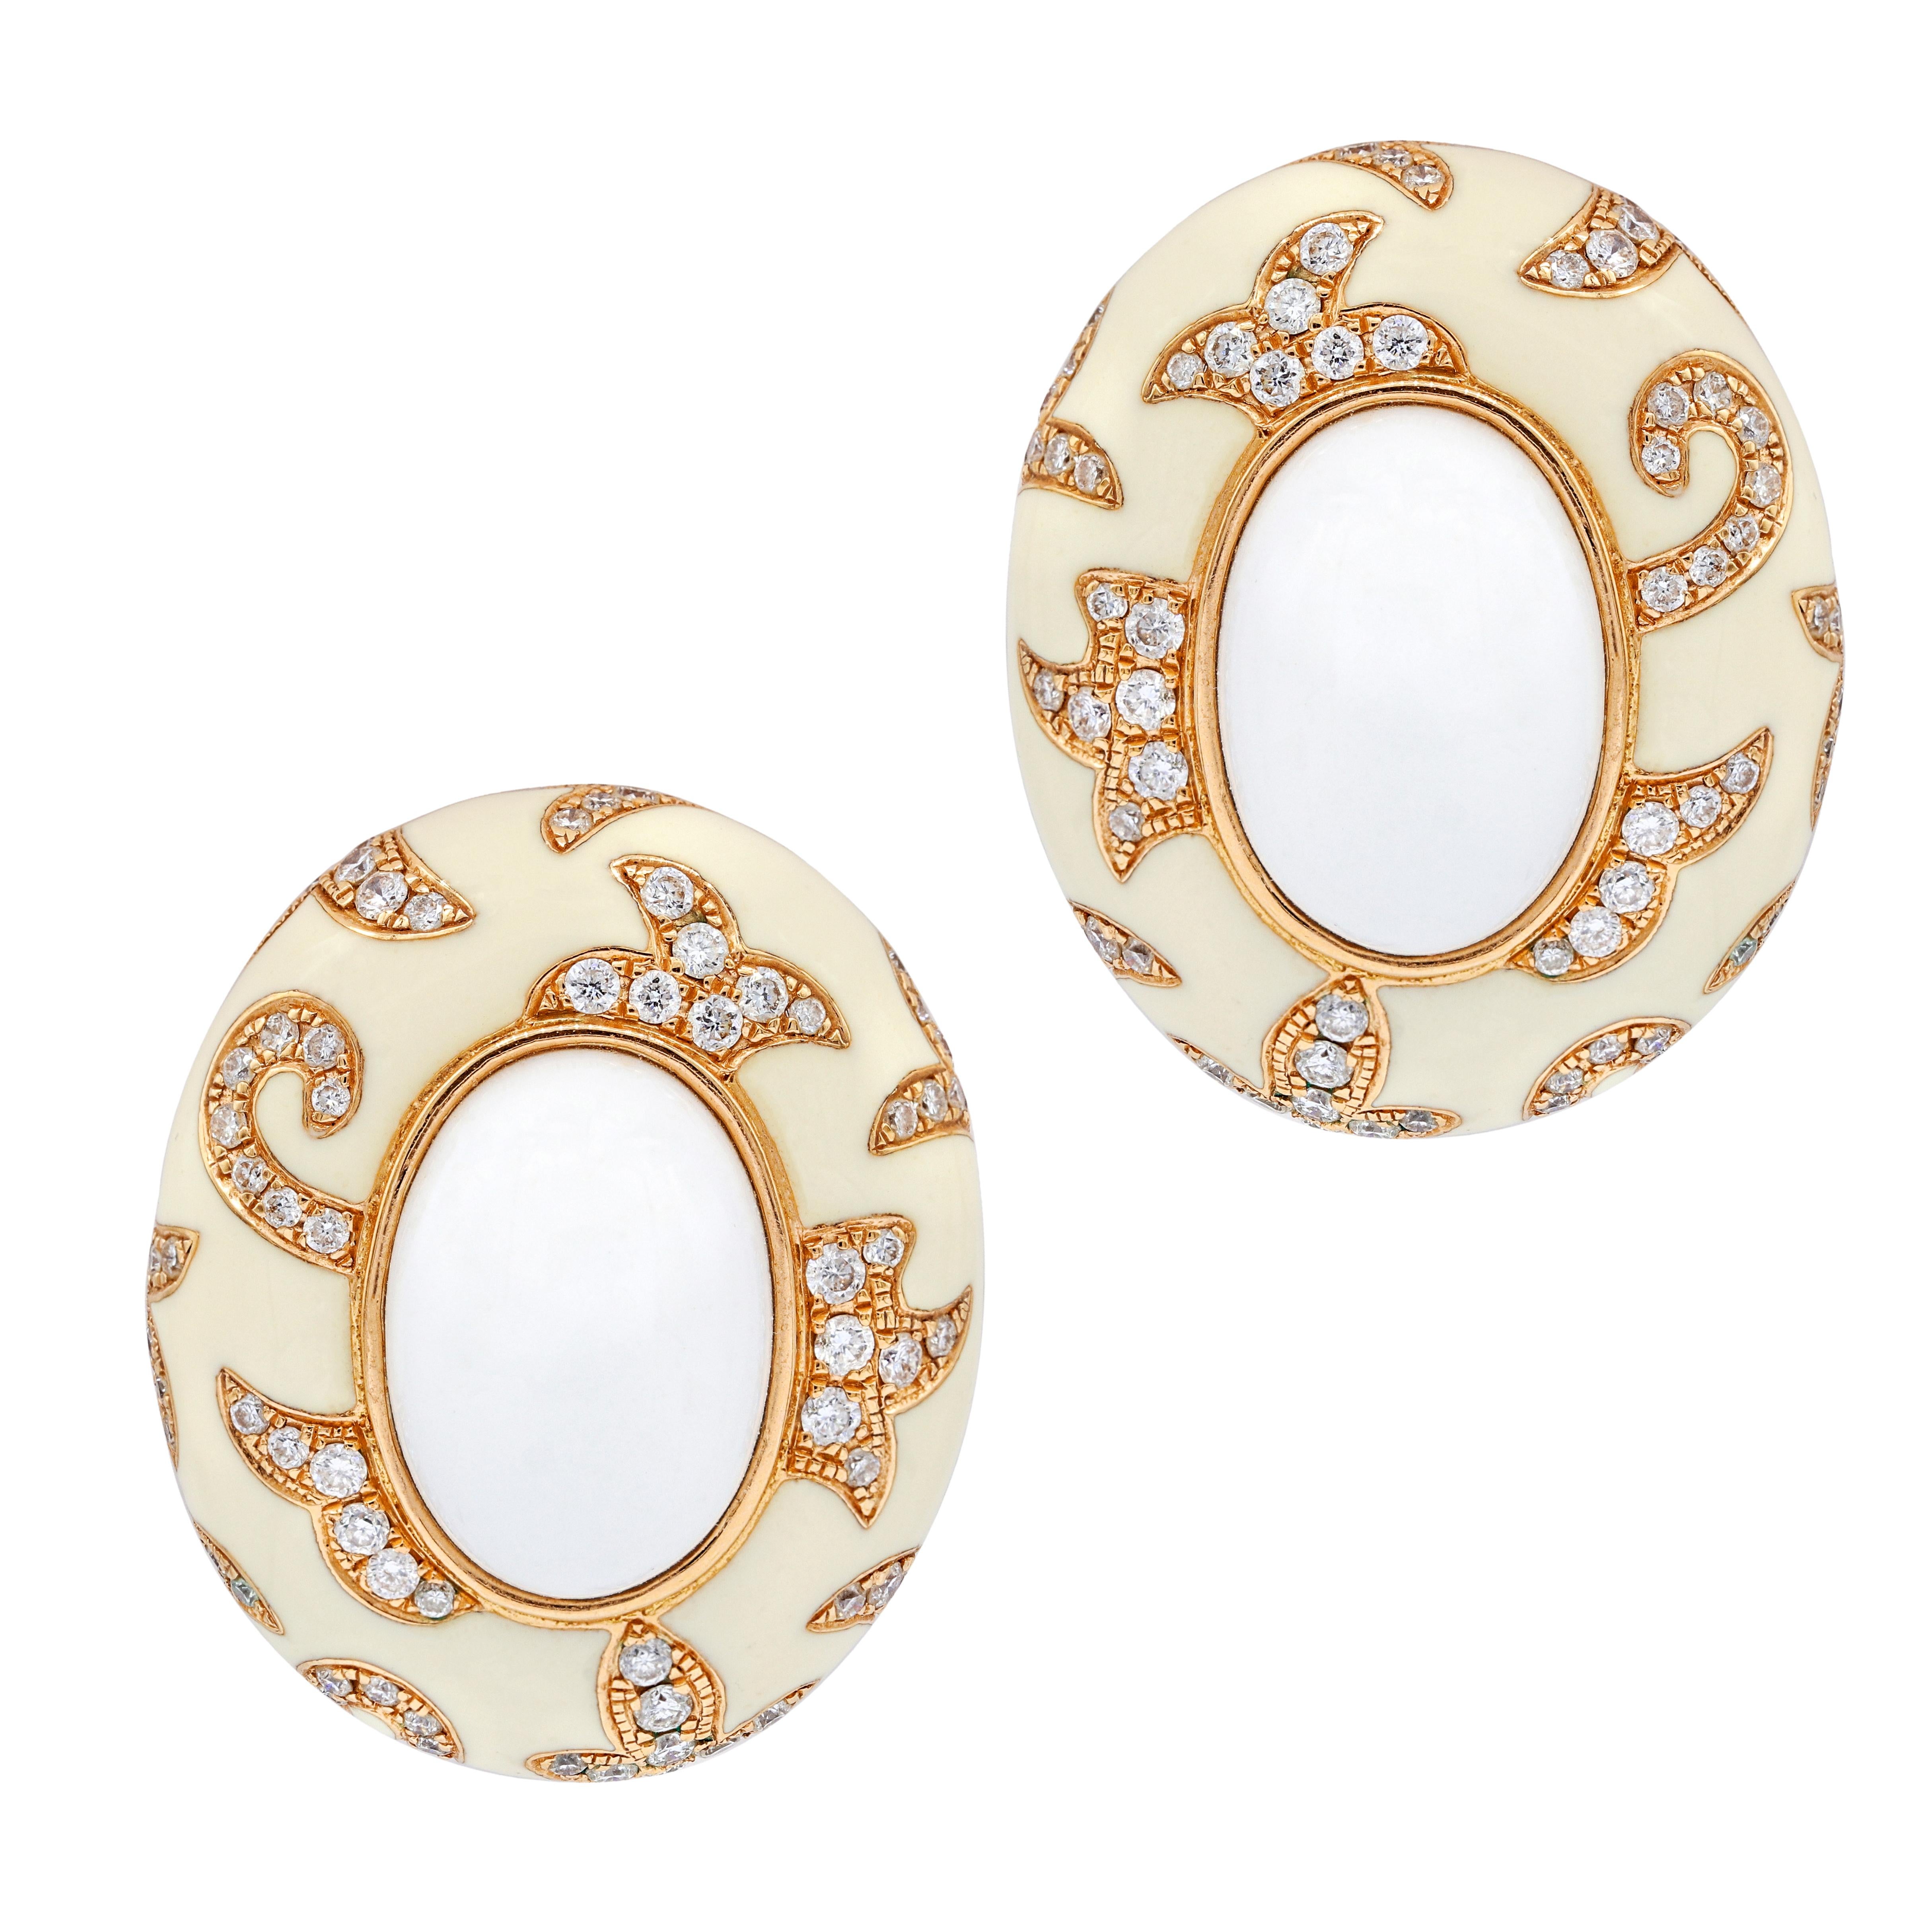 18kt rose gold diamond and white enamel earrings features 1.00 carat of diamonds.
